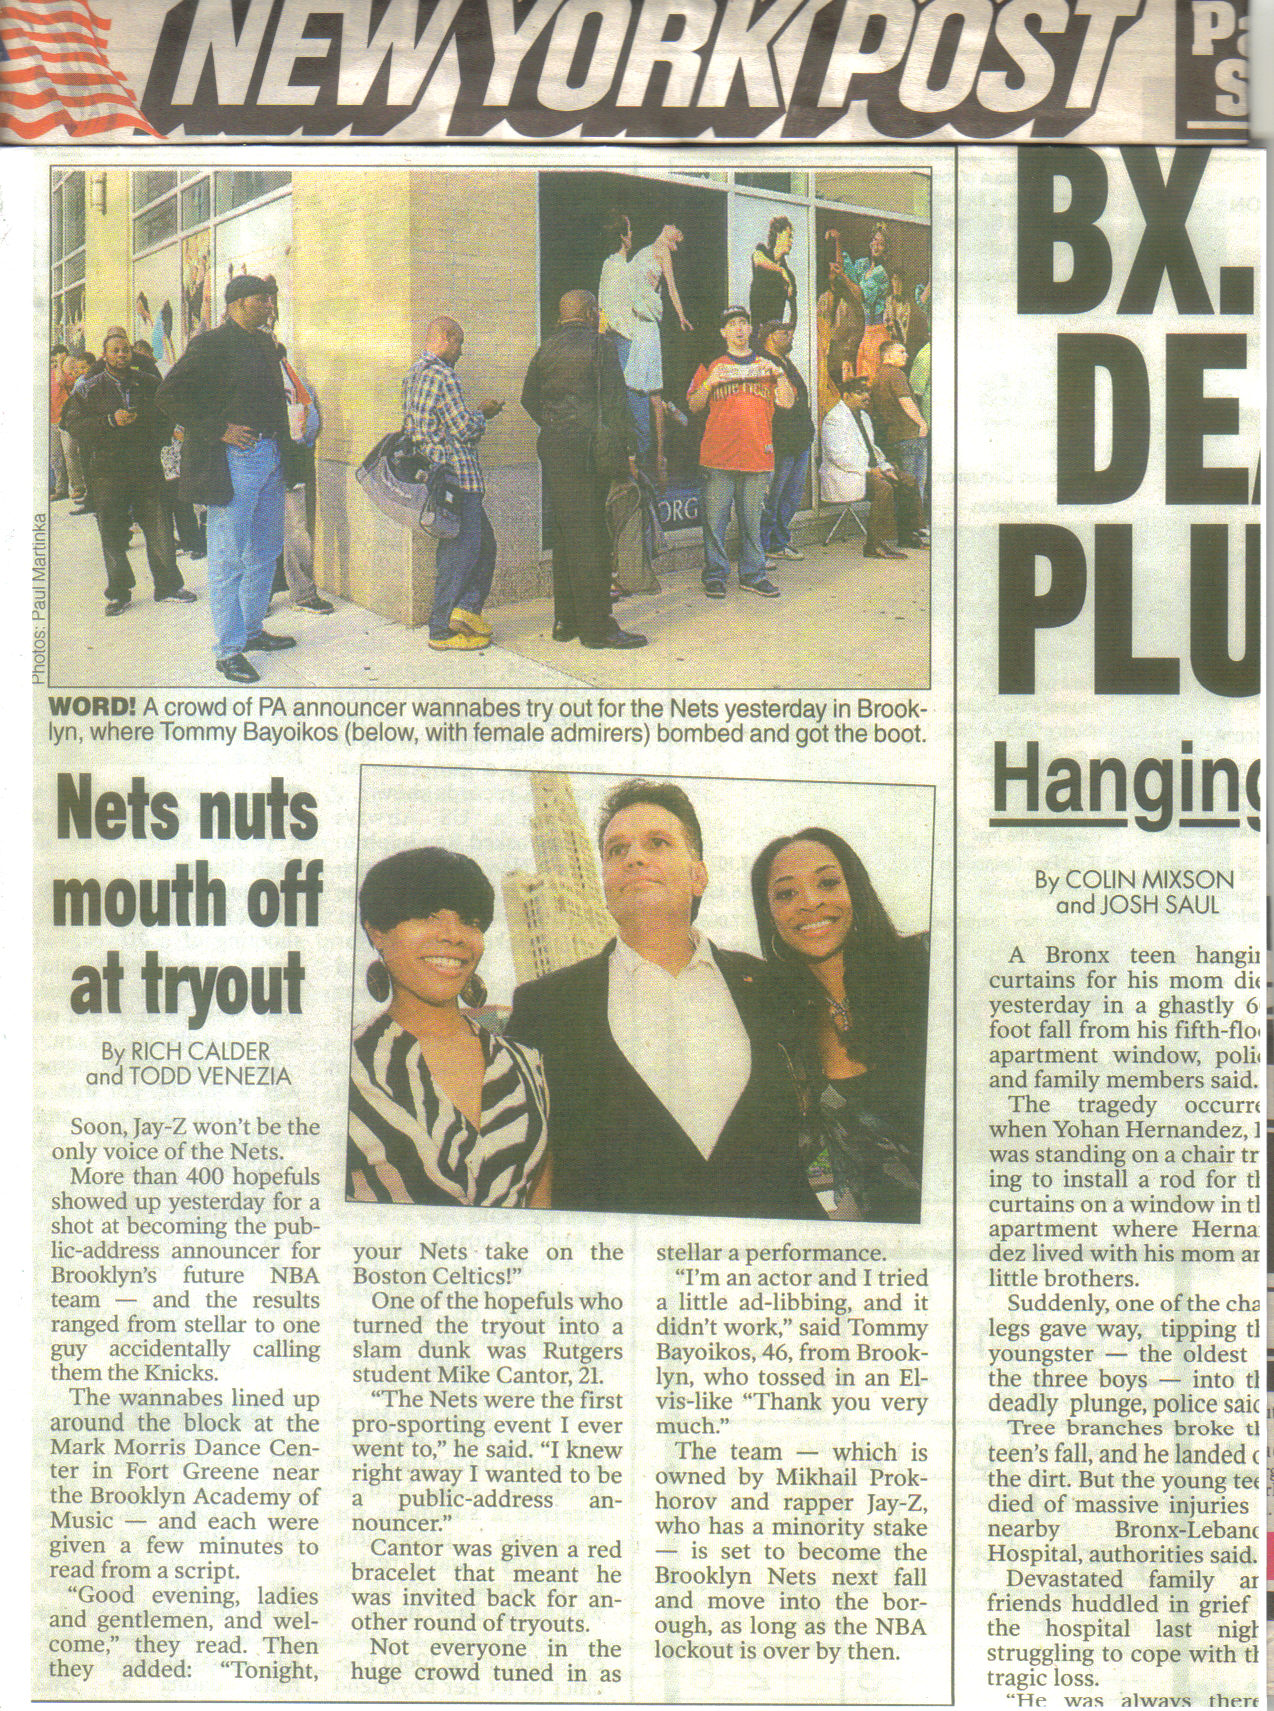 Feature NY Post article on audition, online and on news media TV.